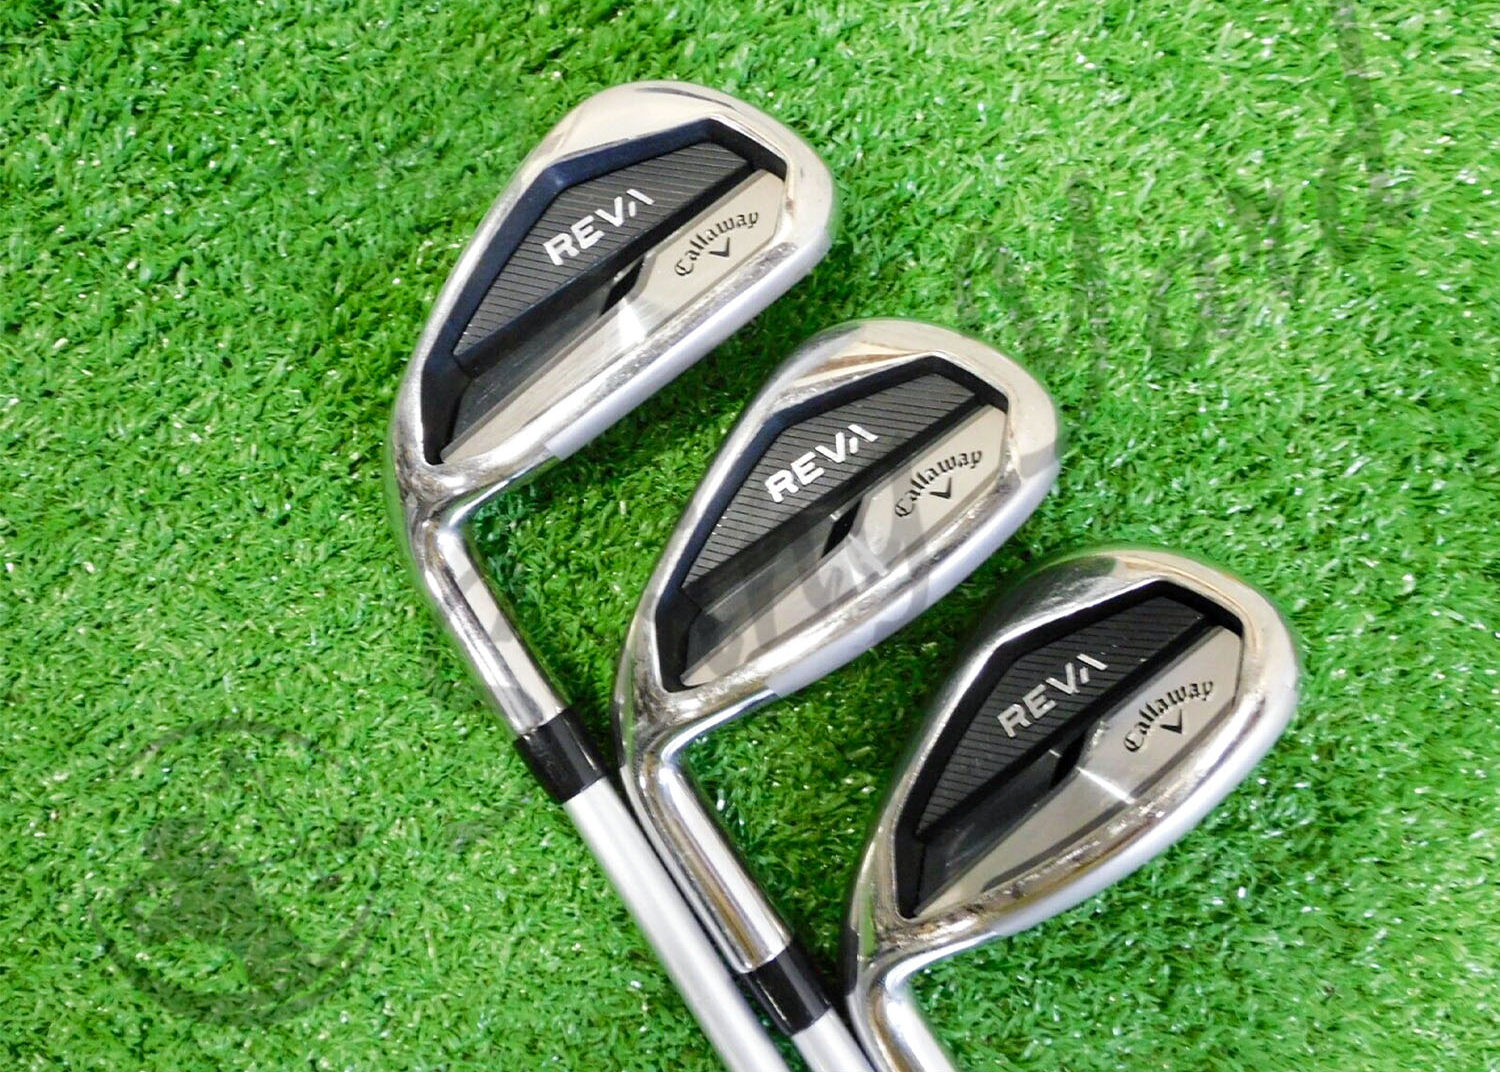 The Callaway Reva Irons for testing at the golf course